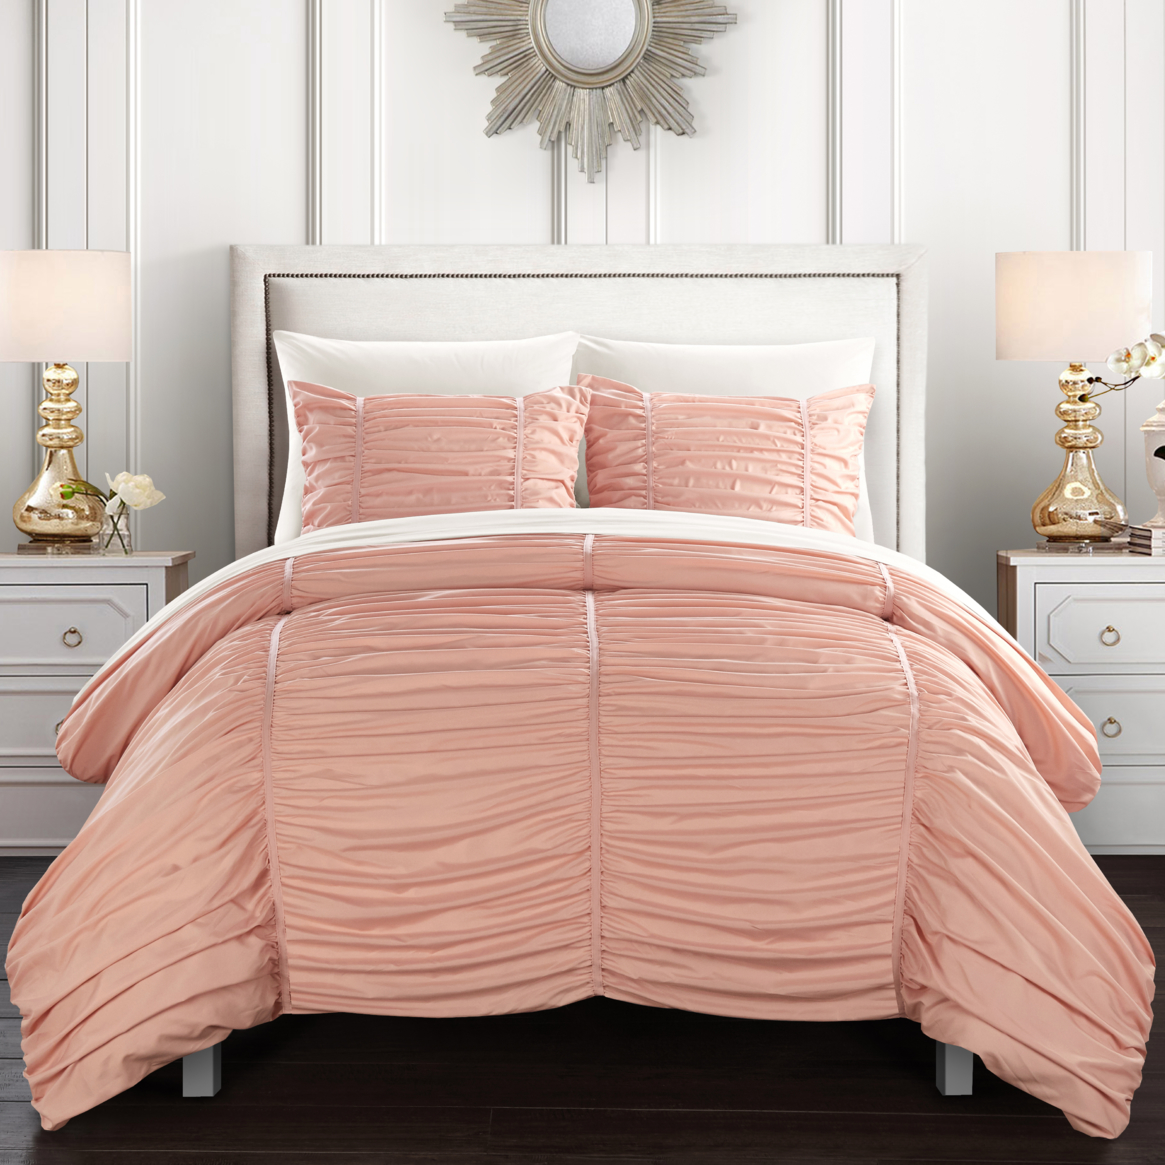 Kleia 7 Or 5 Piece Comforter Set Contemporary Striped Ruched Ruffled Design Bed In A Bag - Coral, King